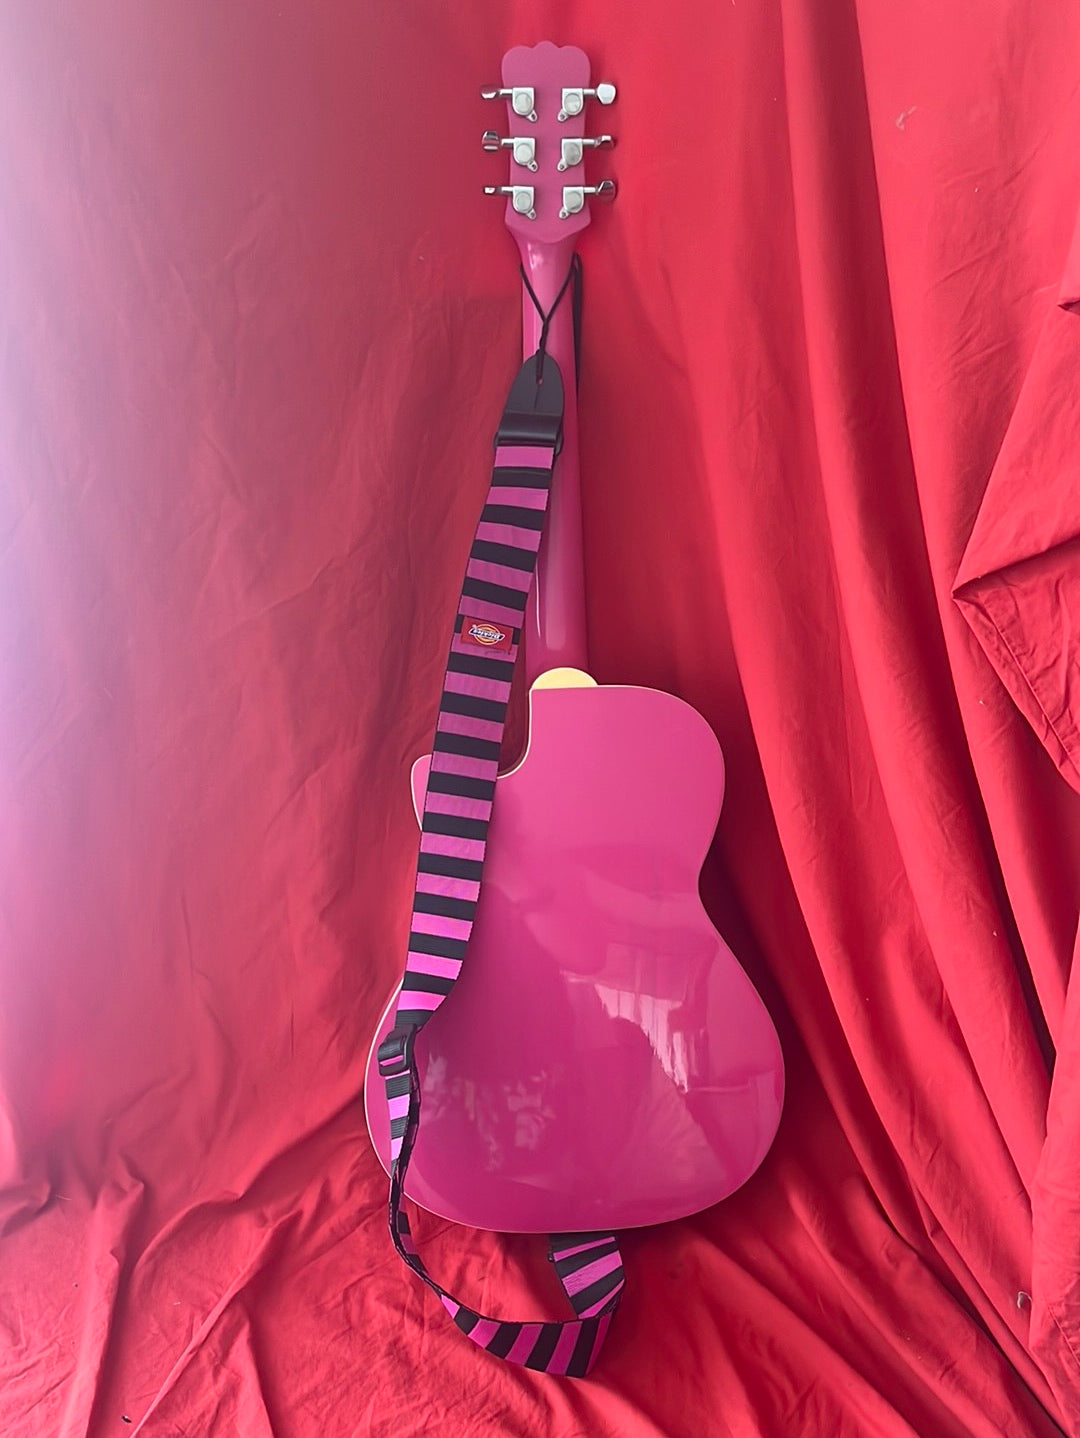 CARLO ROBELLI "Carly" Pink Youth Guitar with Matching Strap and Blue Gig Bag